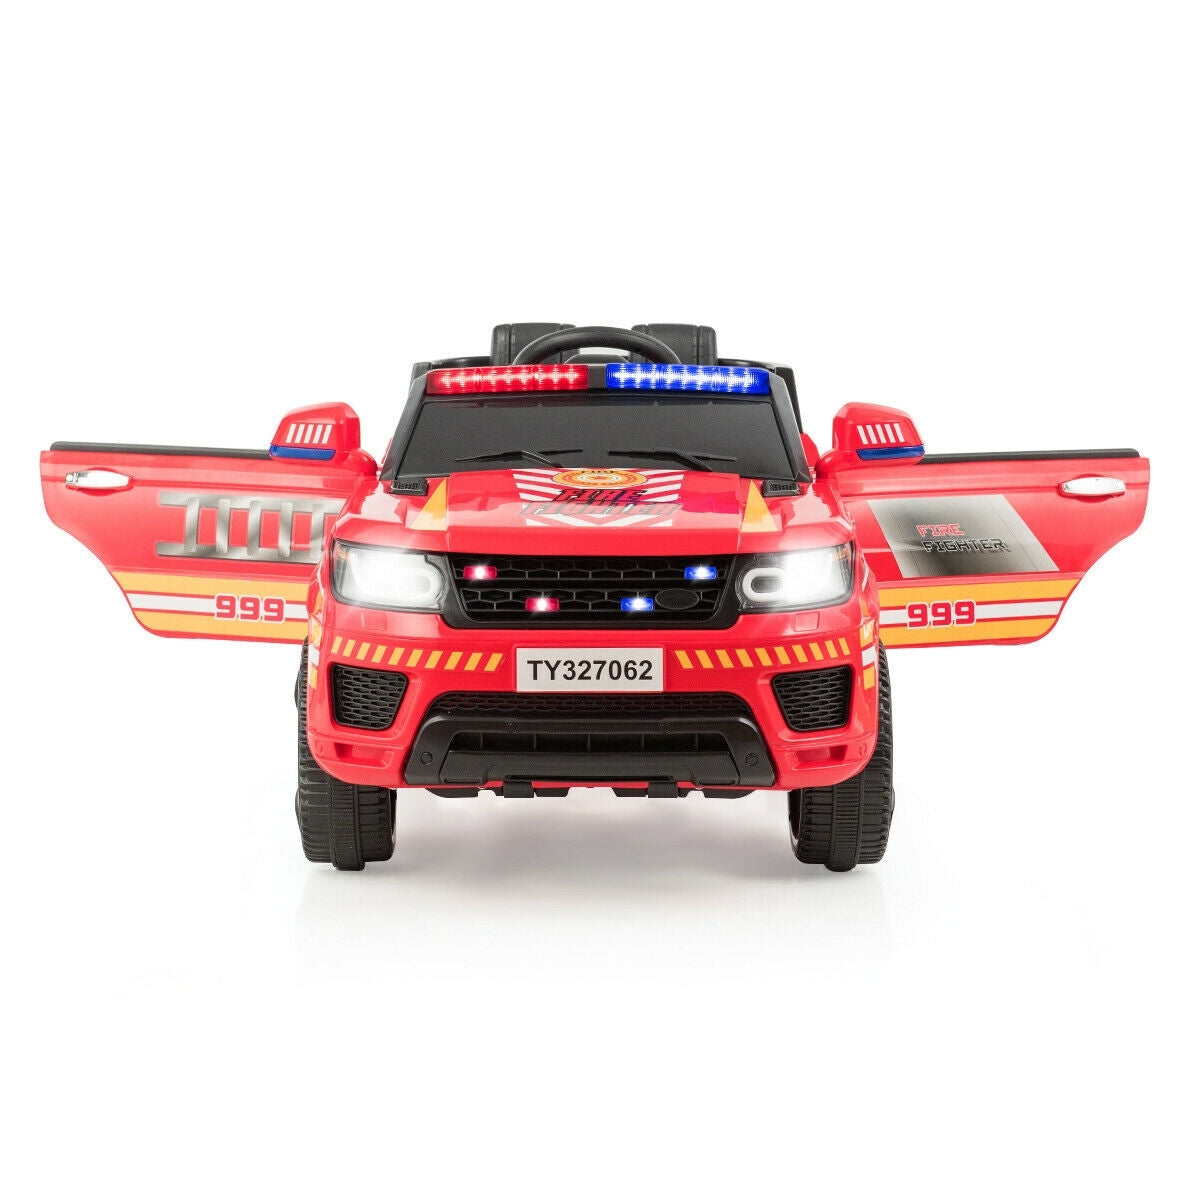 12V Kids Electric Ride On Car with Remote Control-Red